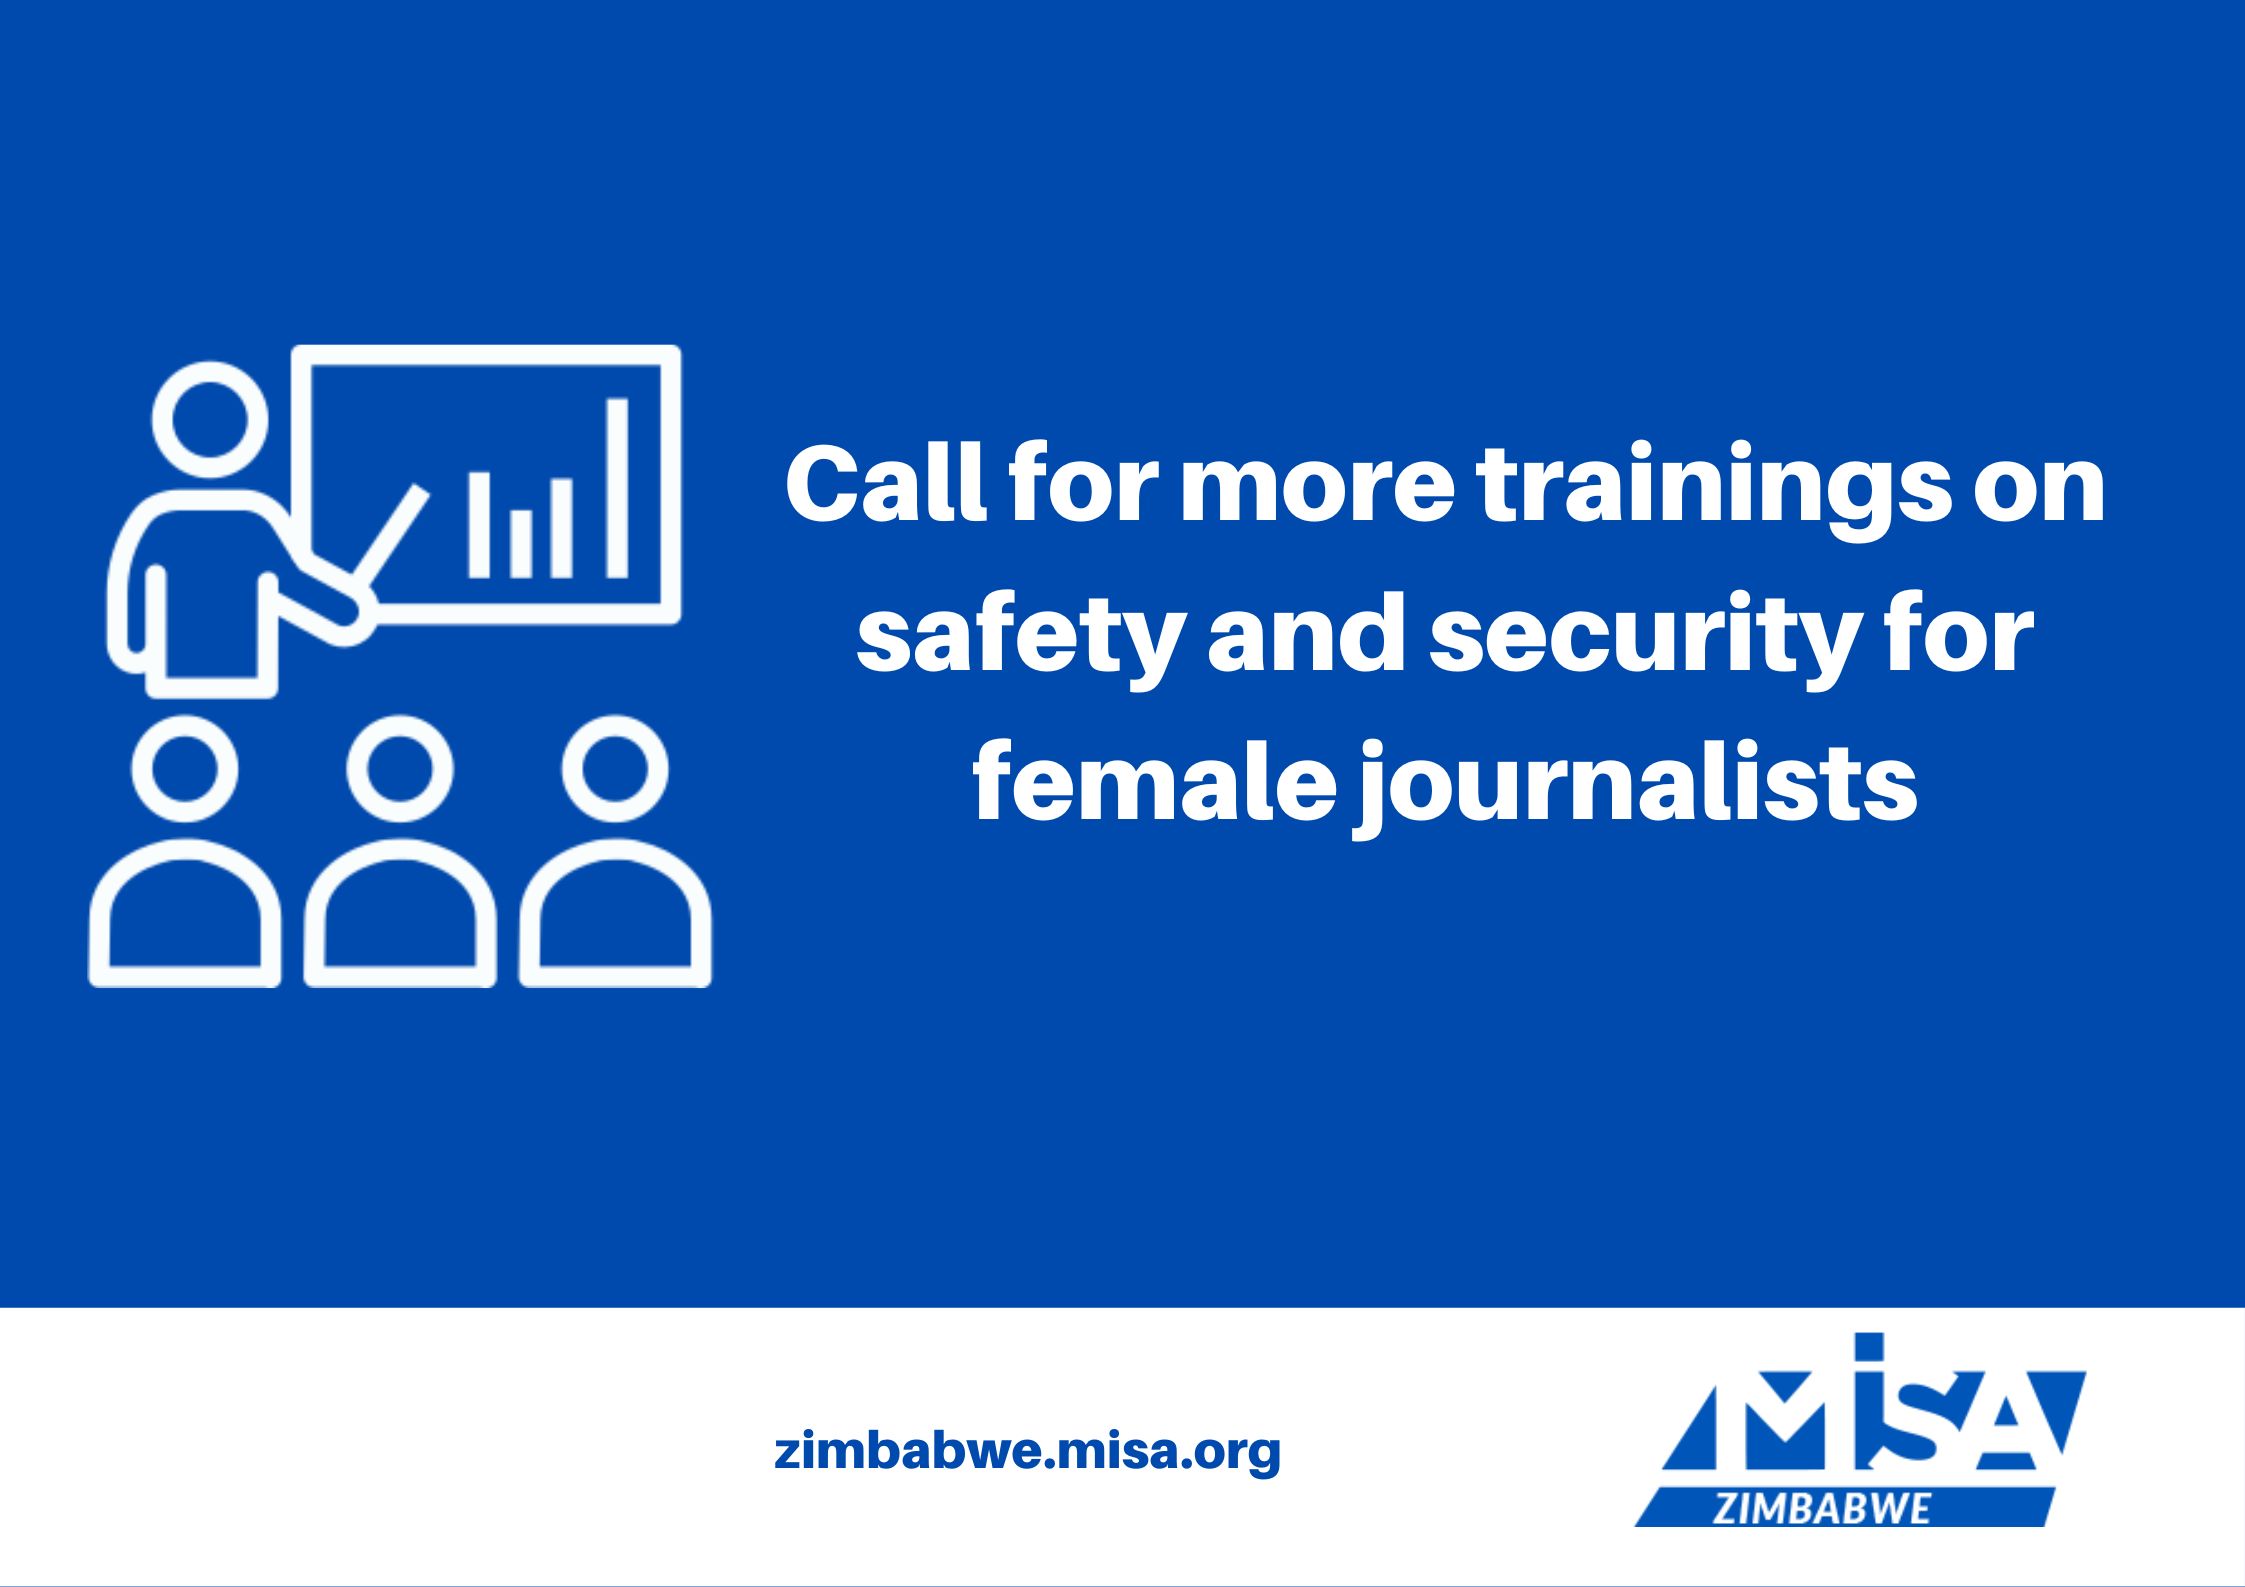 Call for more trainings on safety and security for female journalists